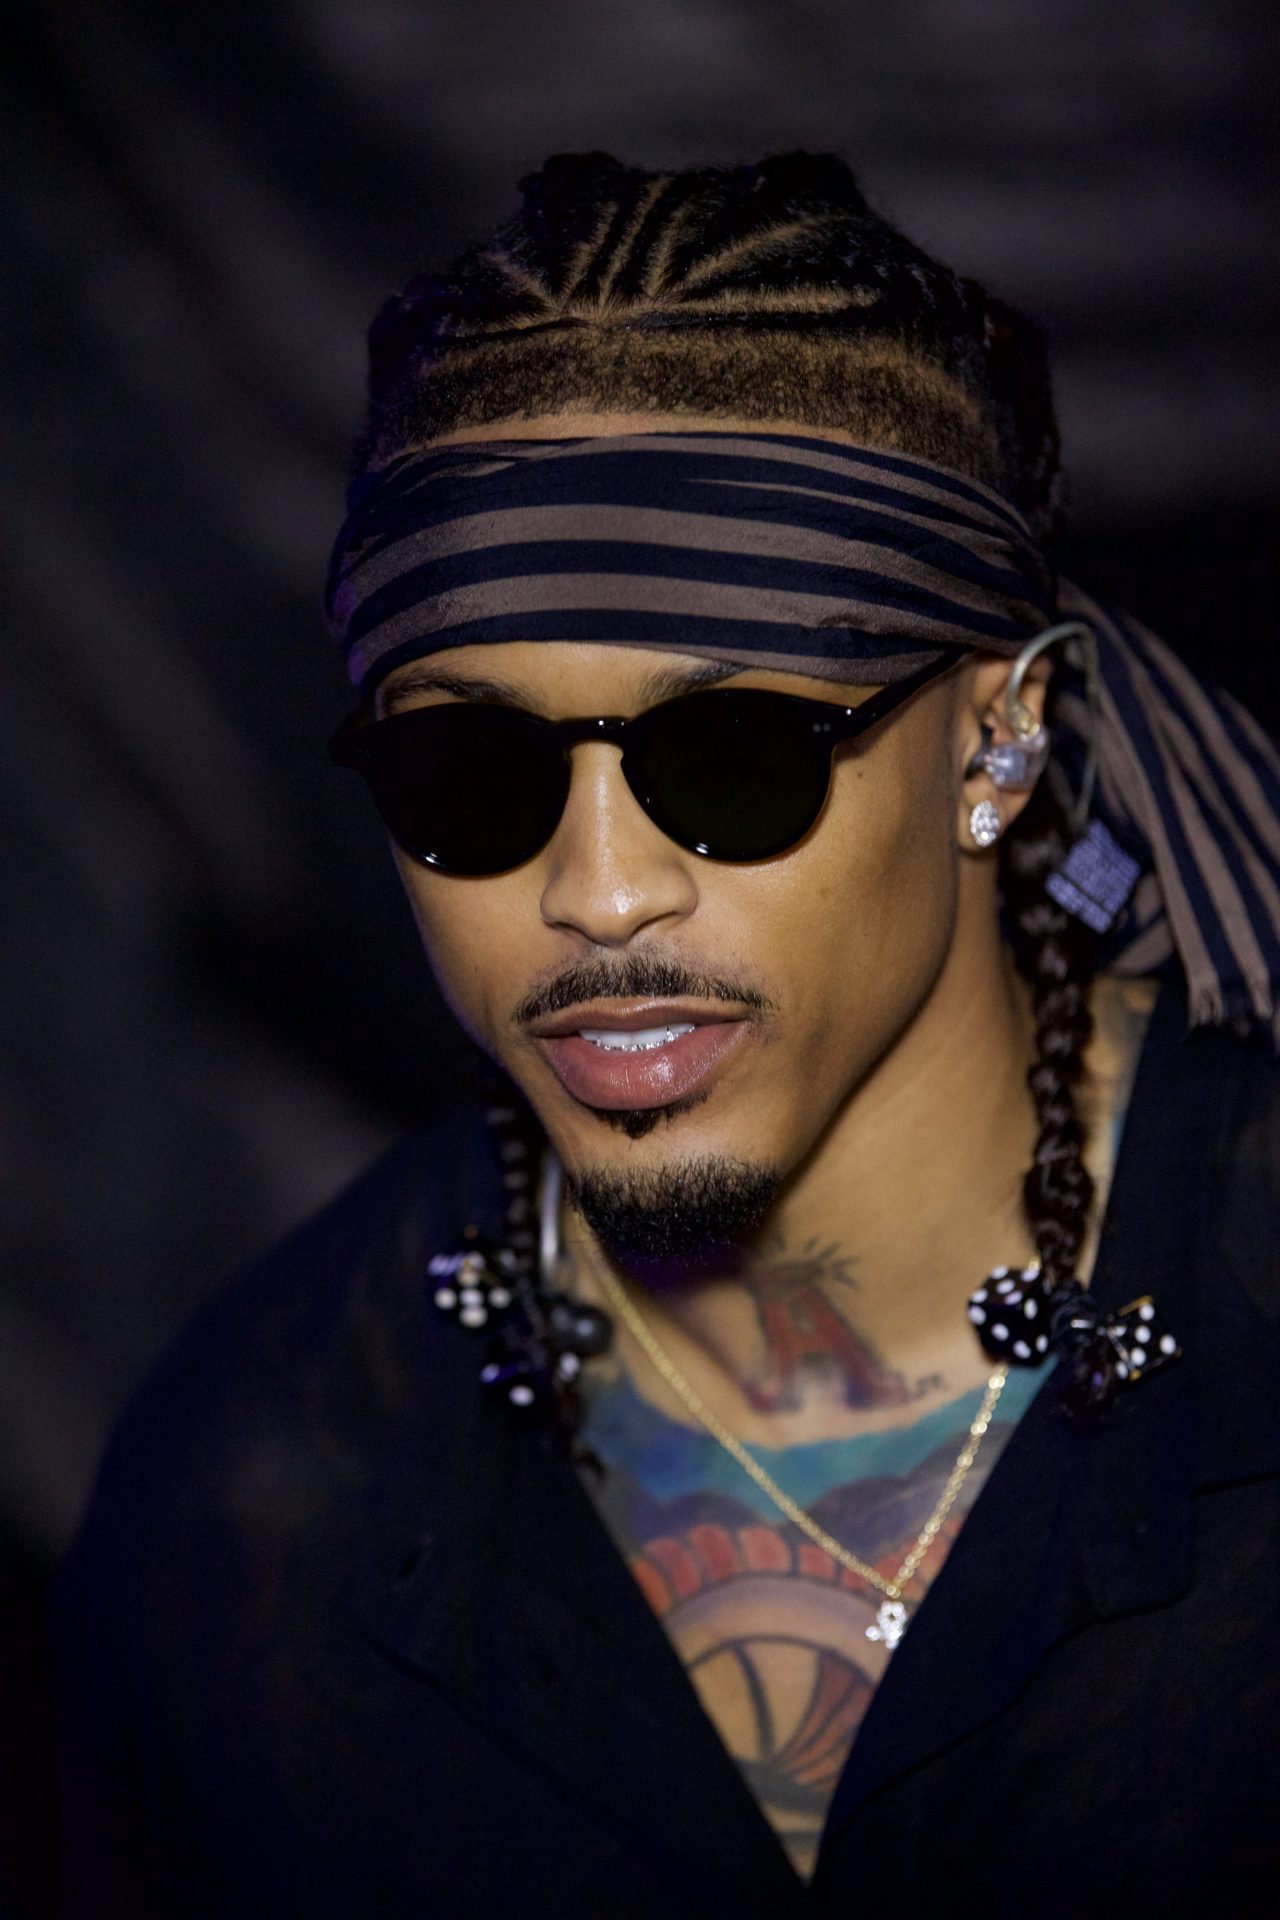 Exclusive | Audio Leaks of August Alsina’s Spurious Diss Track To Chris Rock (Audio Inside)